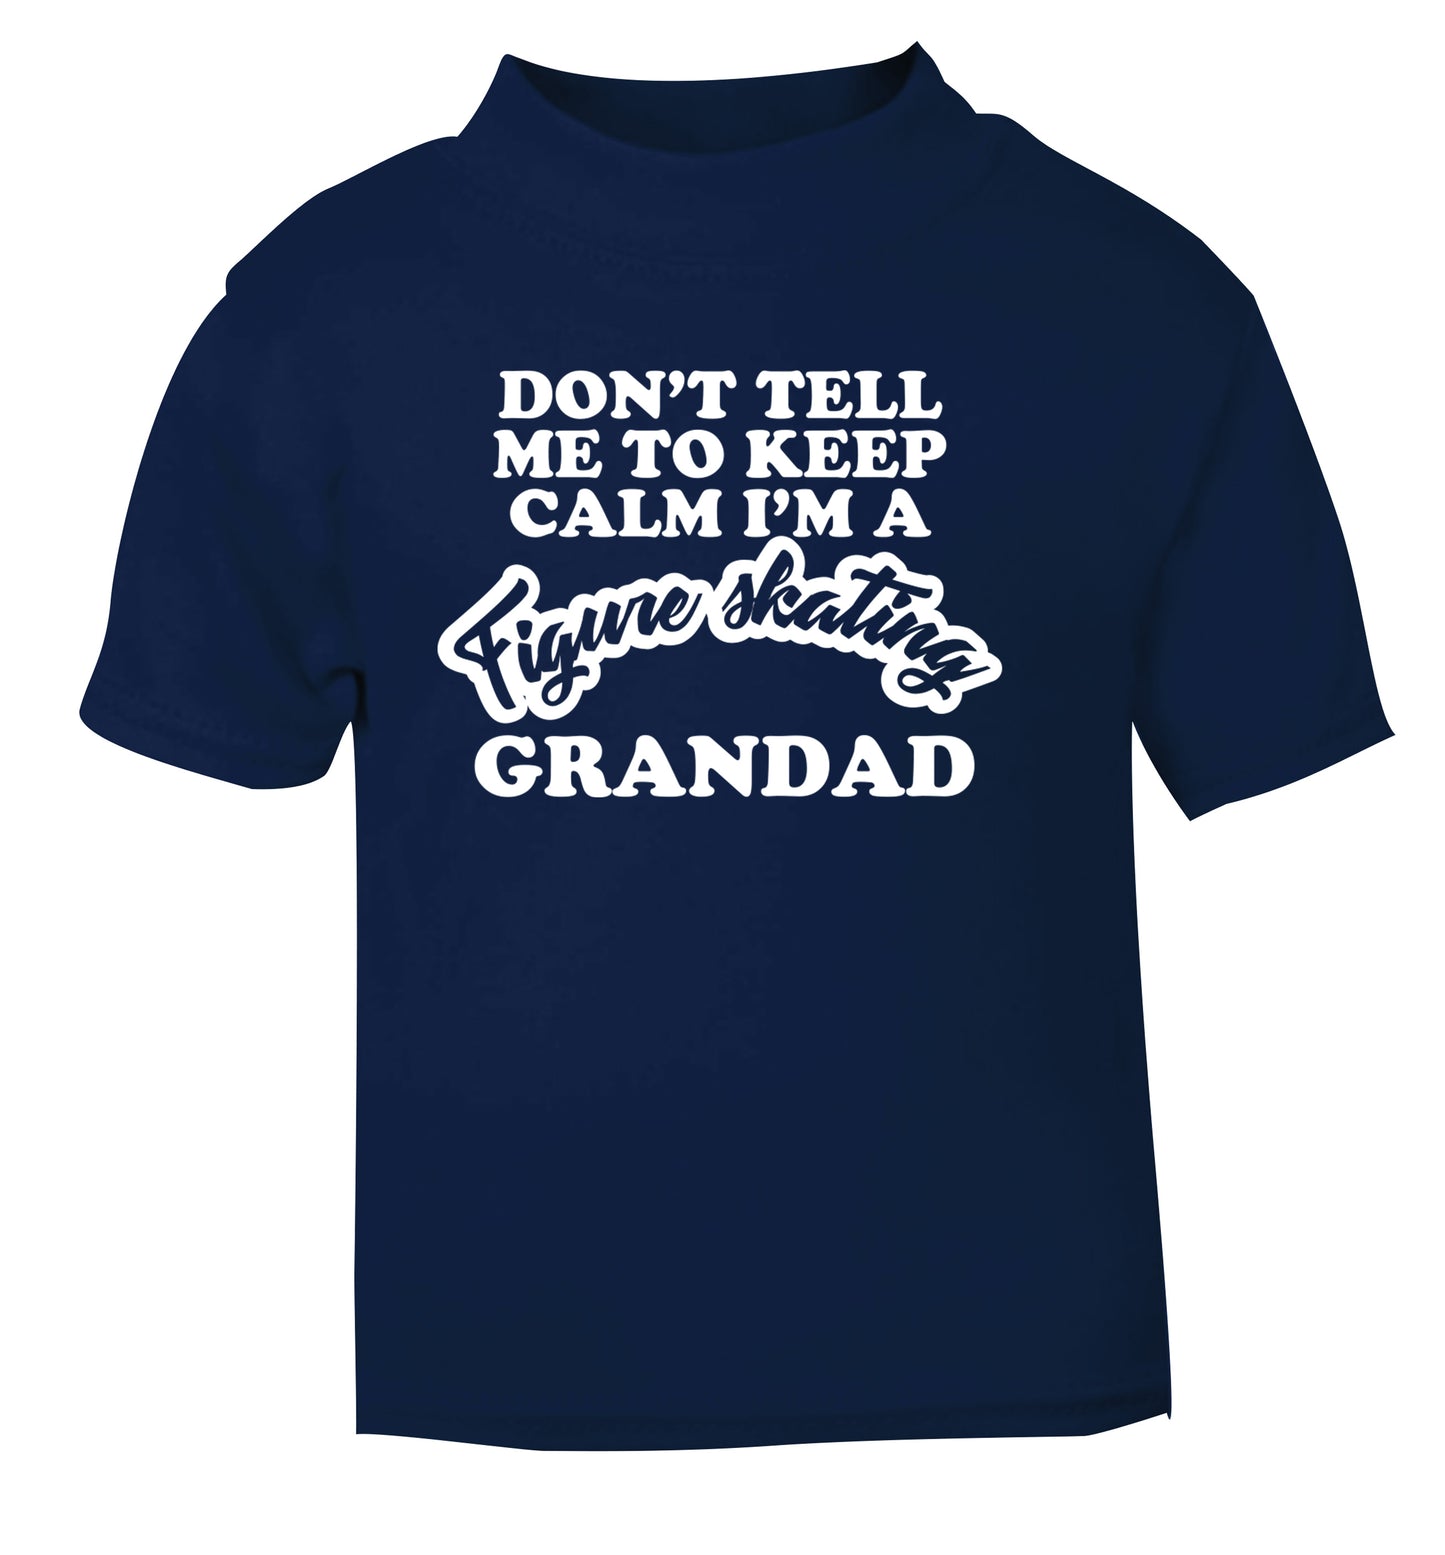 Don't tell me to keep calm I'm a figure skating grandad navy Baby Toddler Tshirt 2 Years